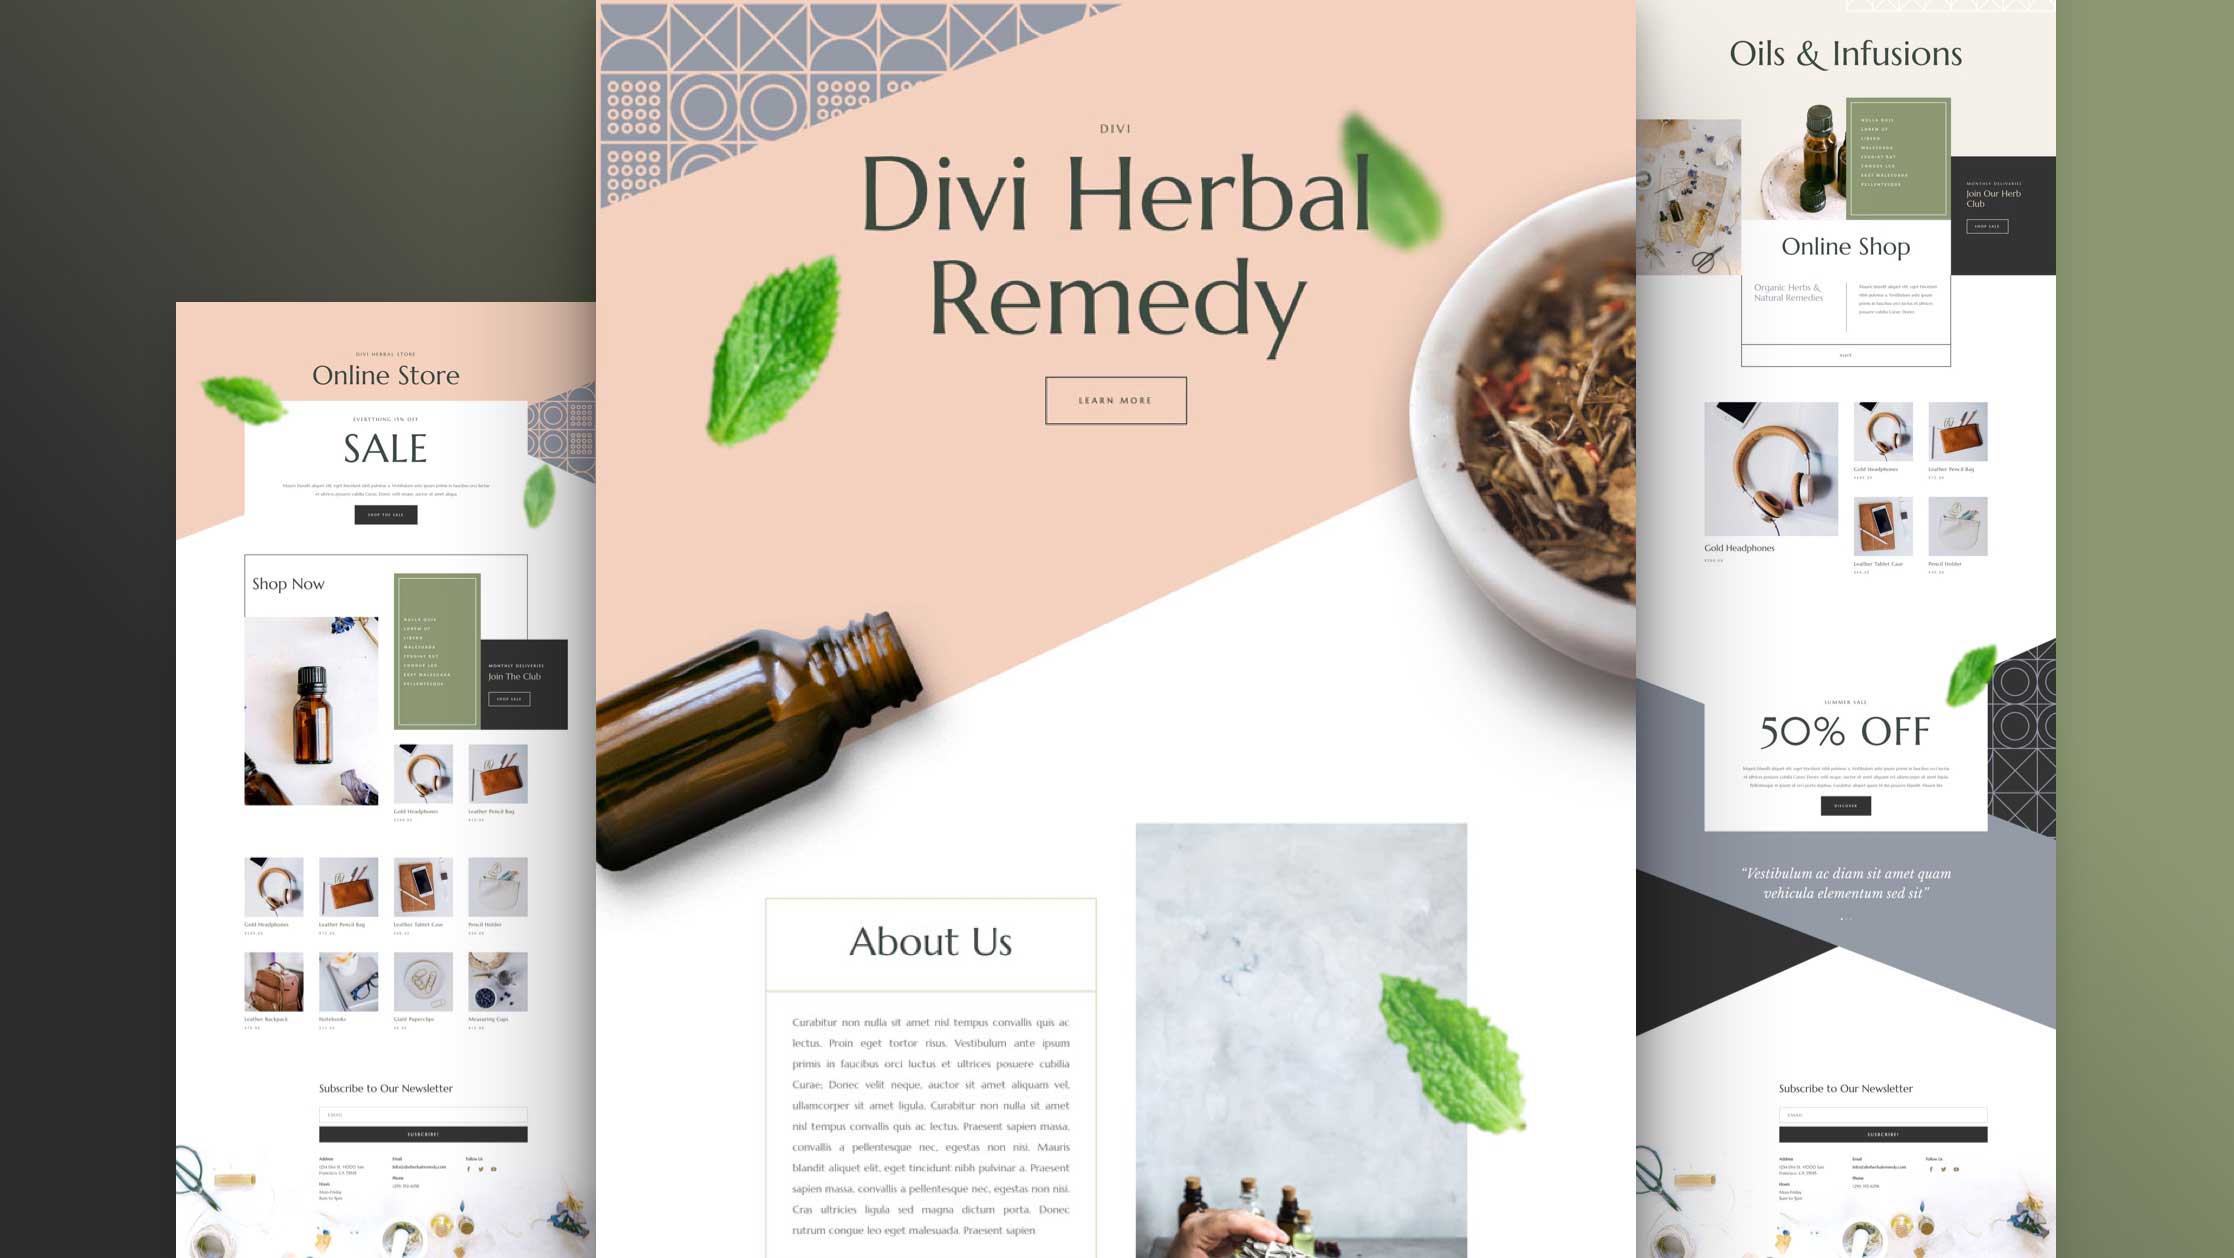 Get a FREE Herbal Remedy Layout Pack for Divi